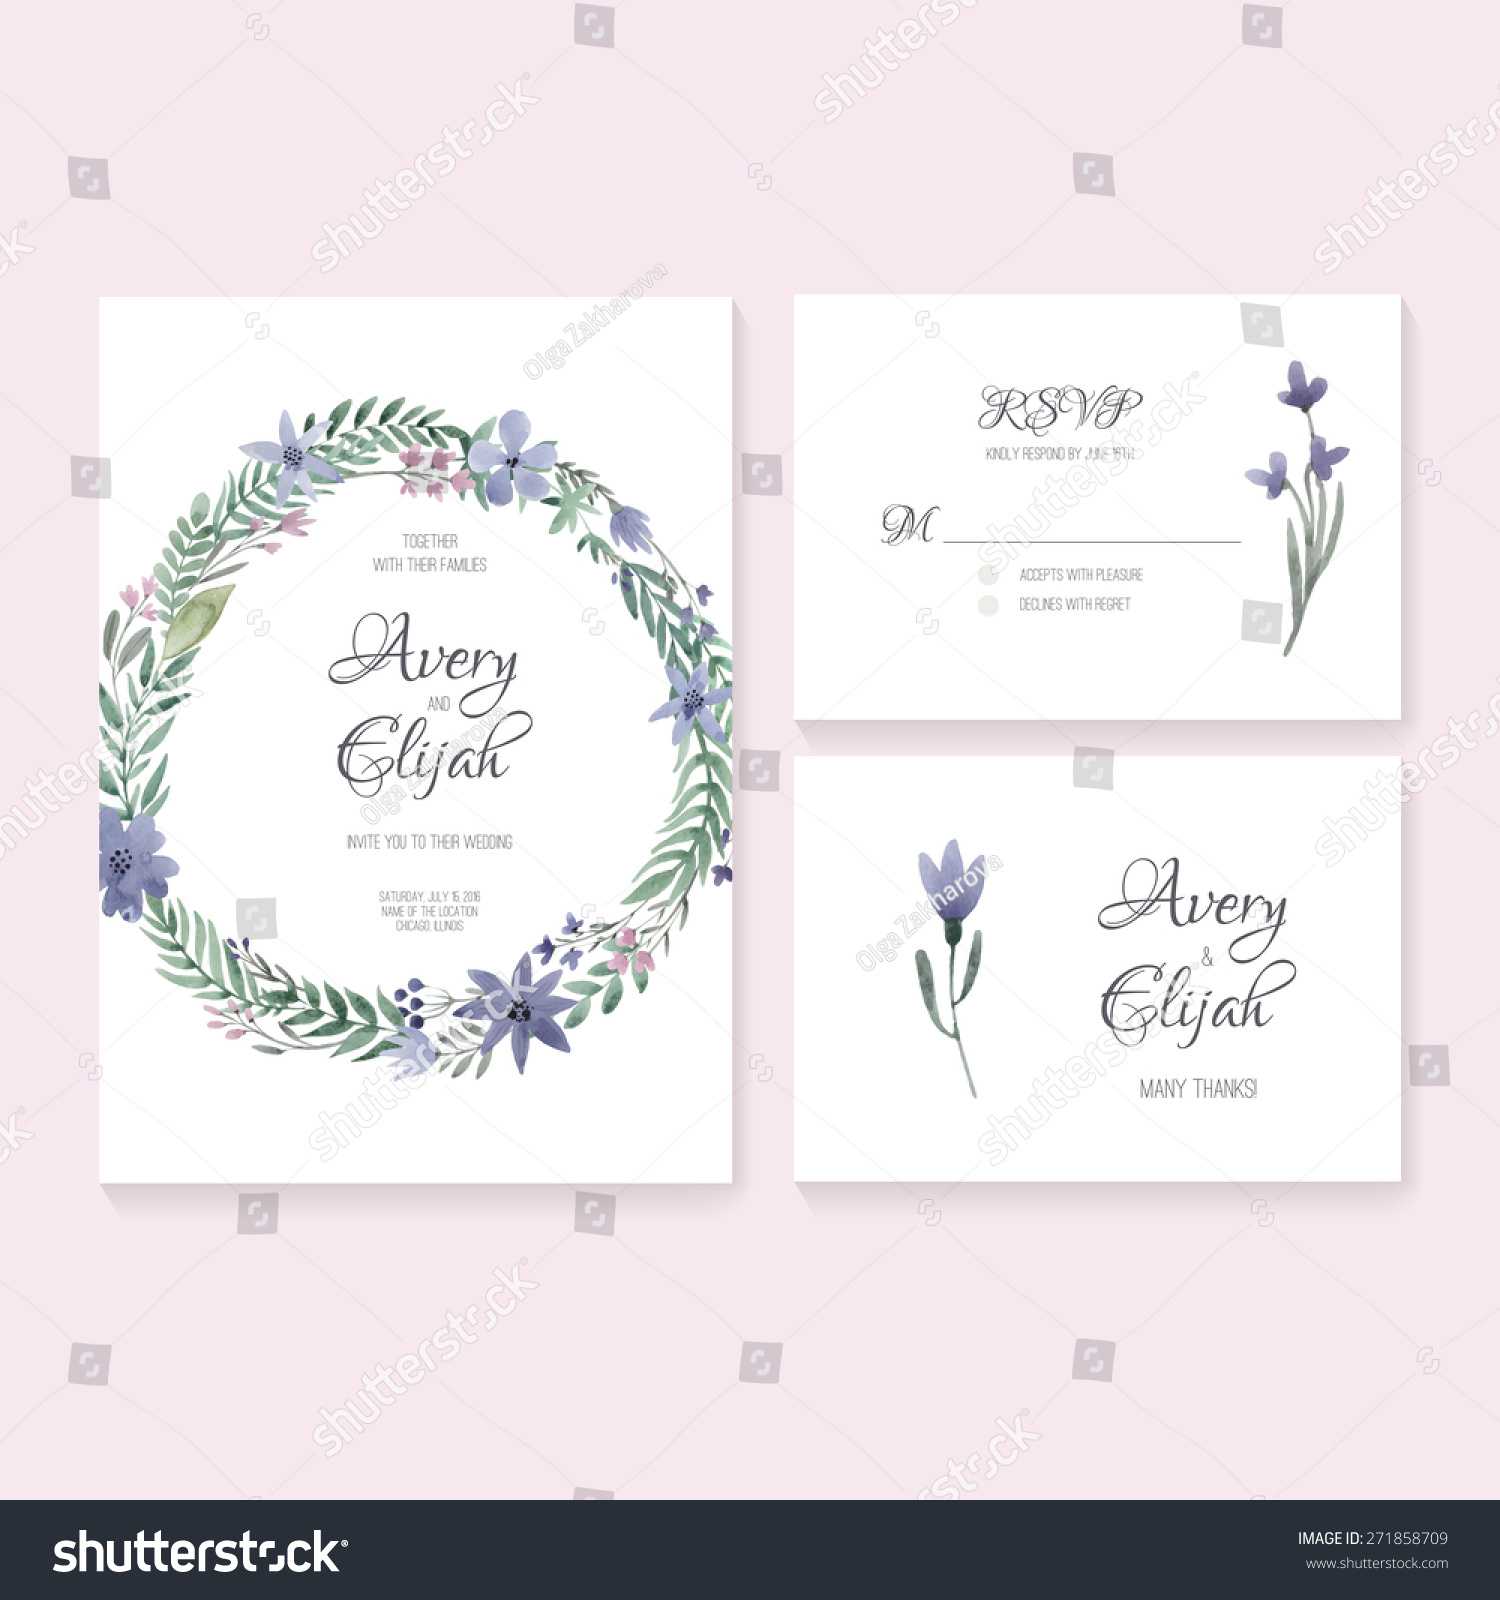 Unique Gentle Vector Wedding Cards Template Stock Vector For Free Wedding Rsvp Postcard Template